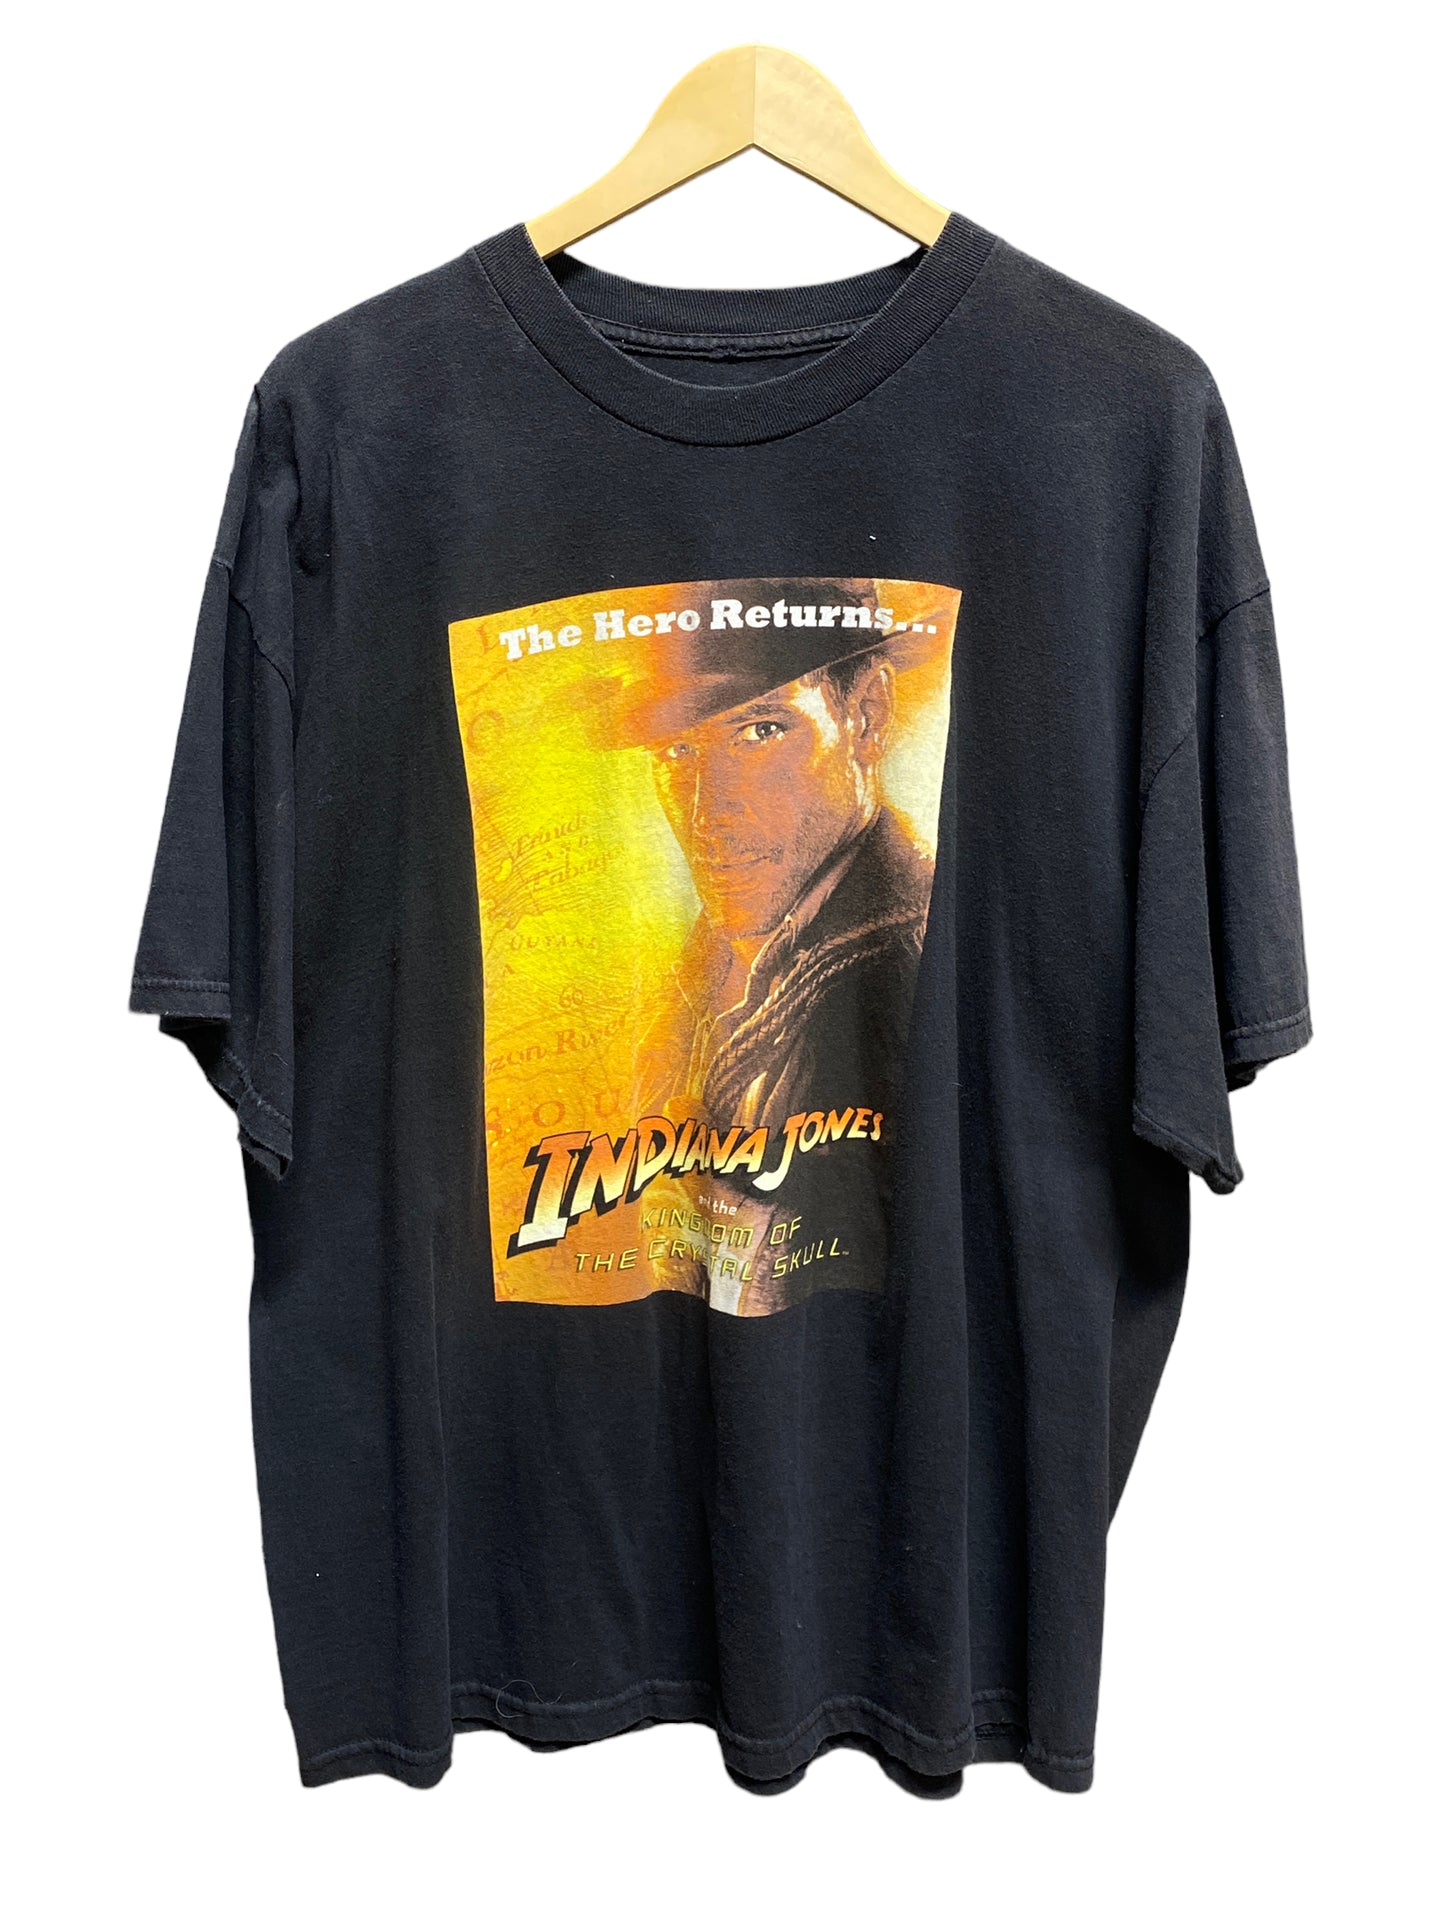 Indiana Jones and the Kingdom of the Crystal Skull Promo Tee Size Large